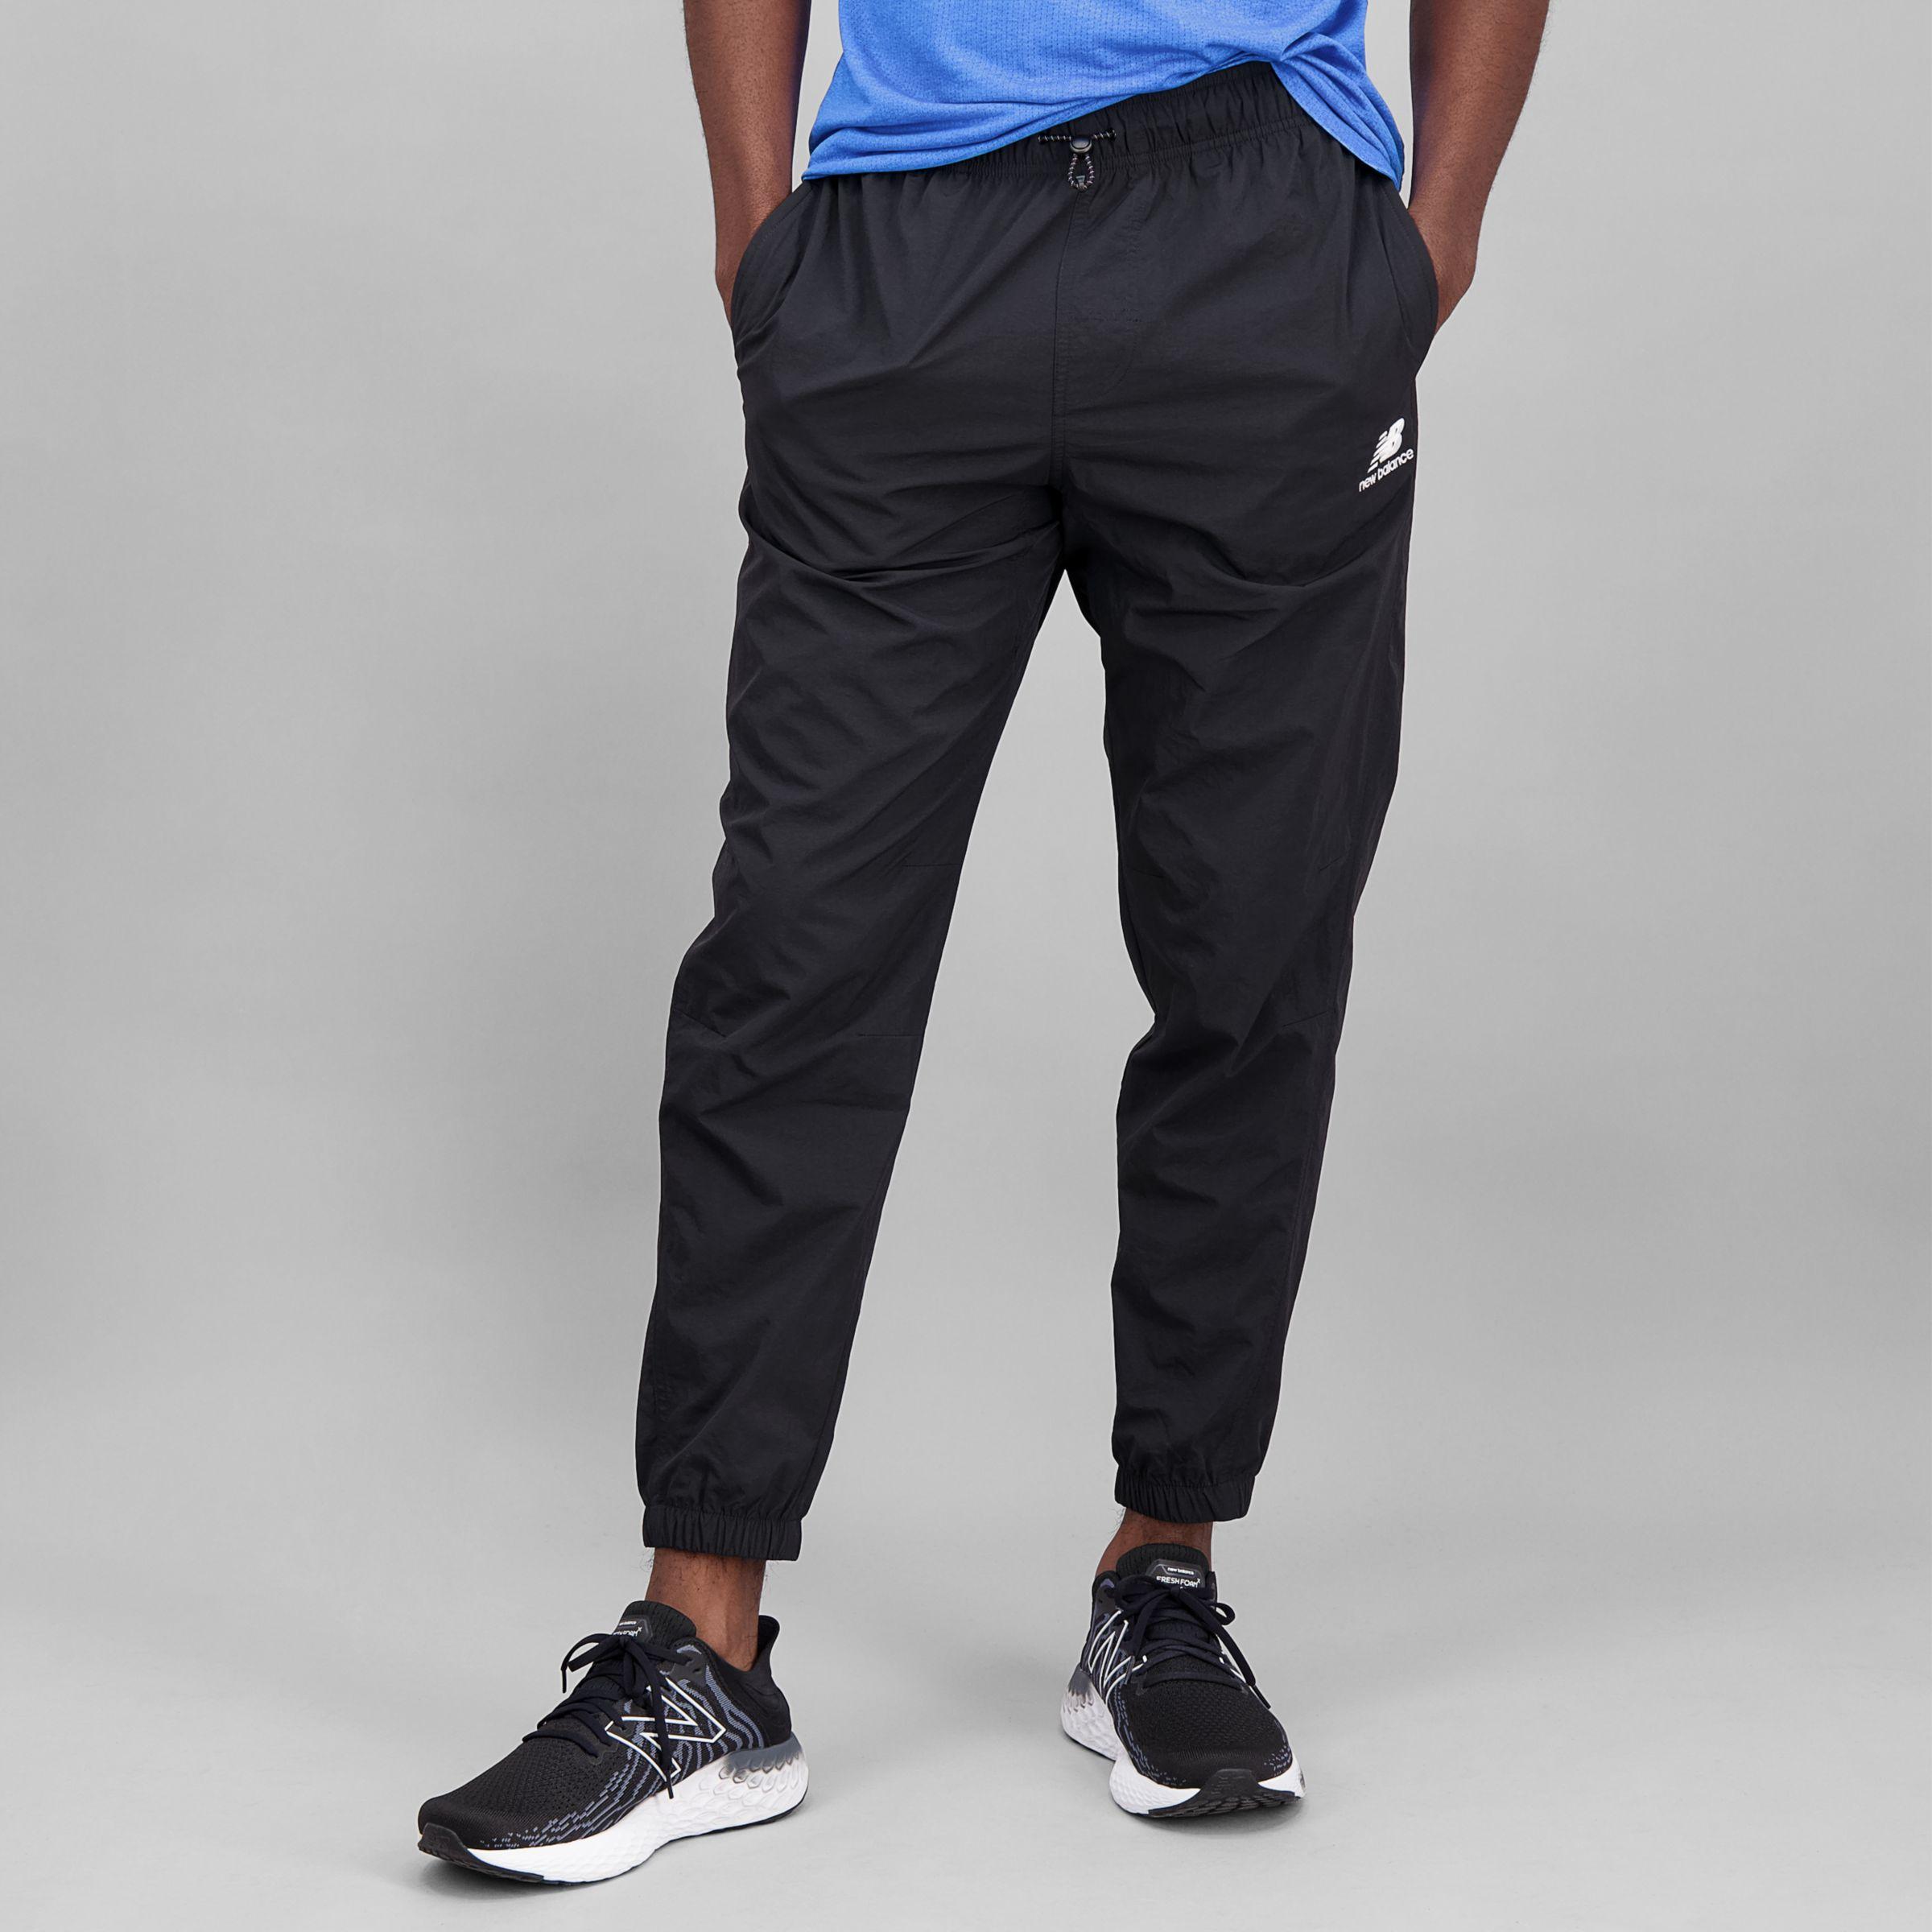 New Balance Nb Athletics Higher Learning Wind Trousers in Black